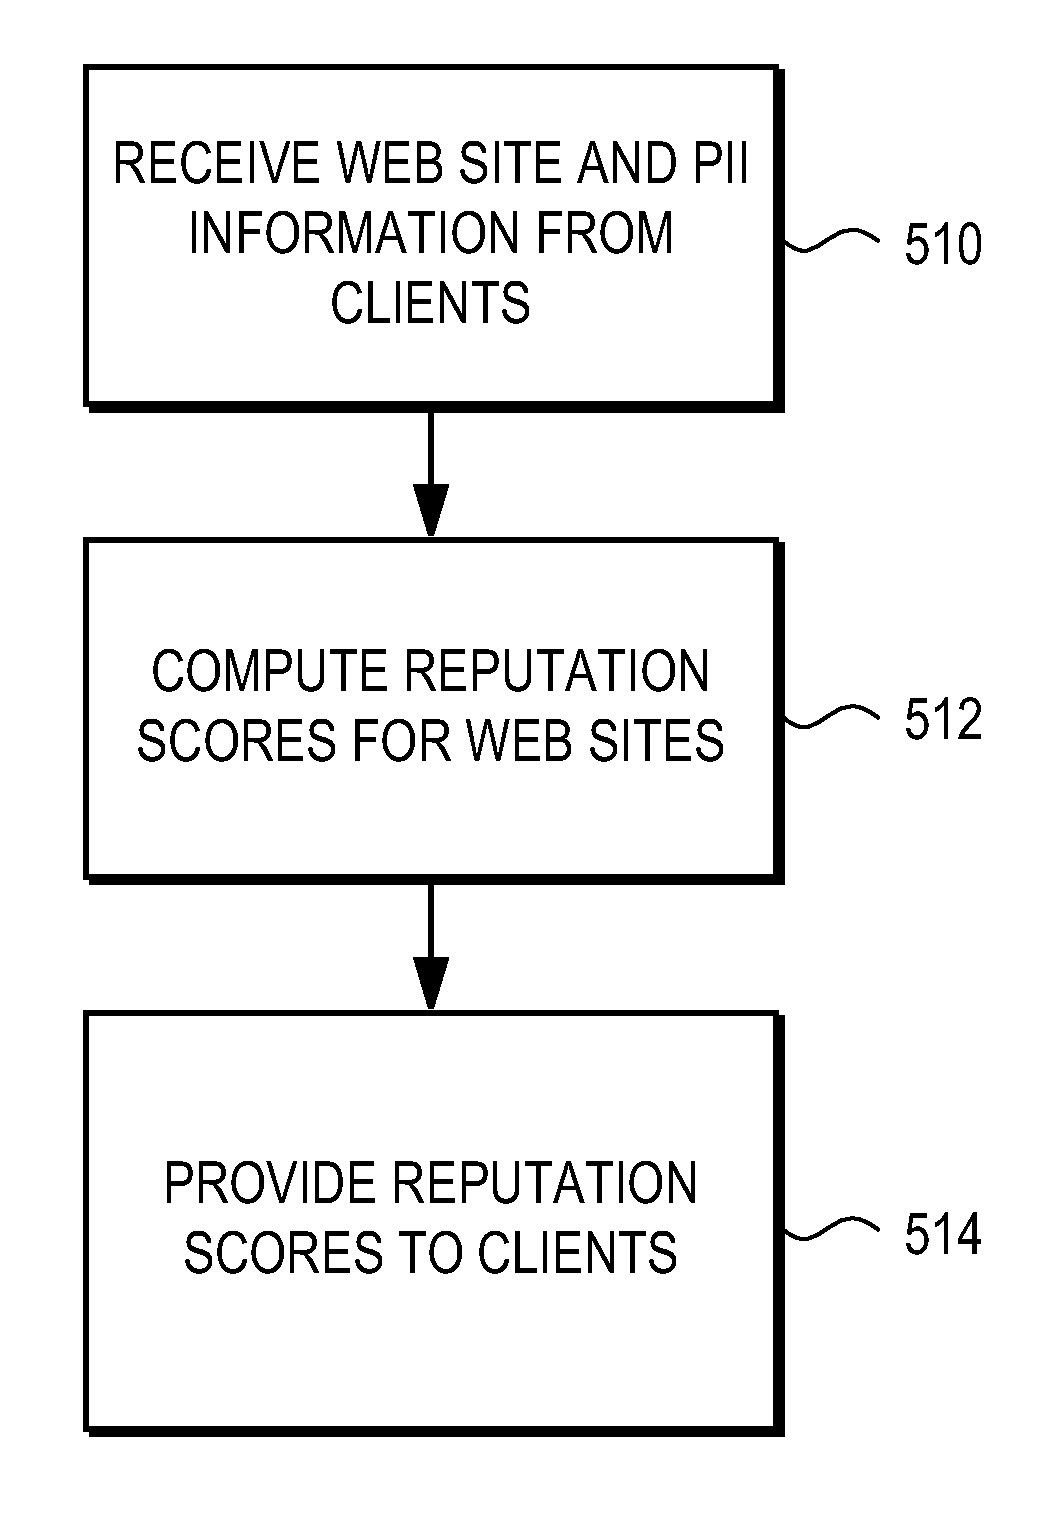 Deriving reputation scores for web sites that accept personally identifiable information